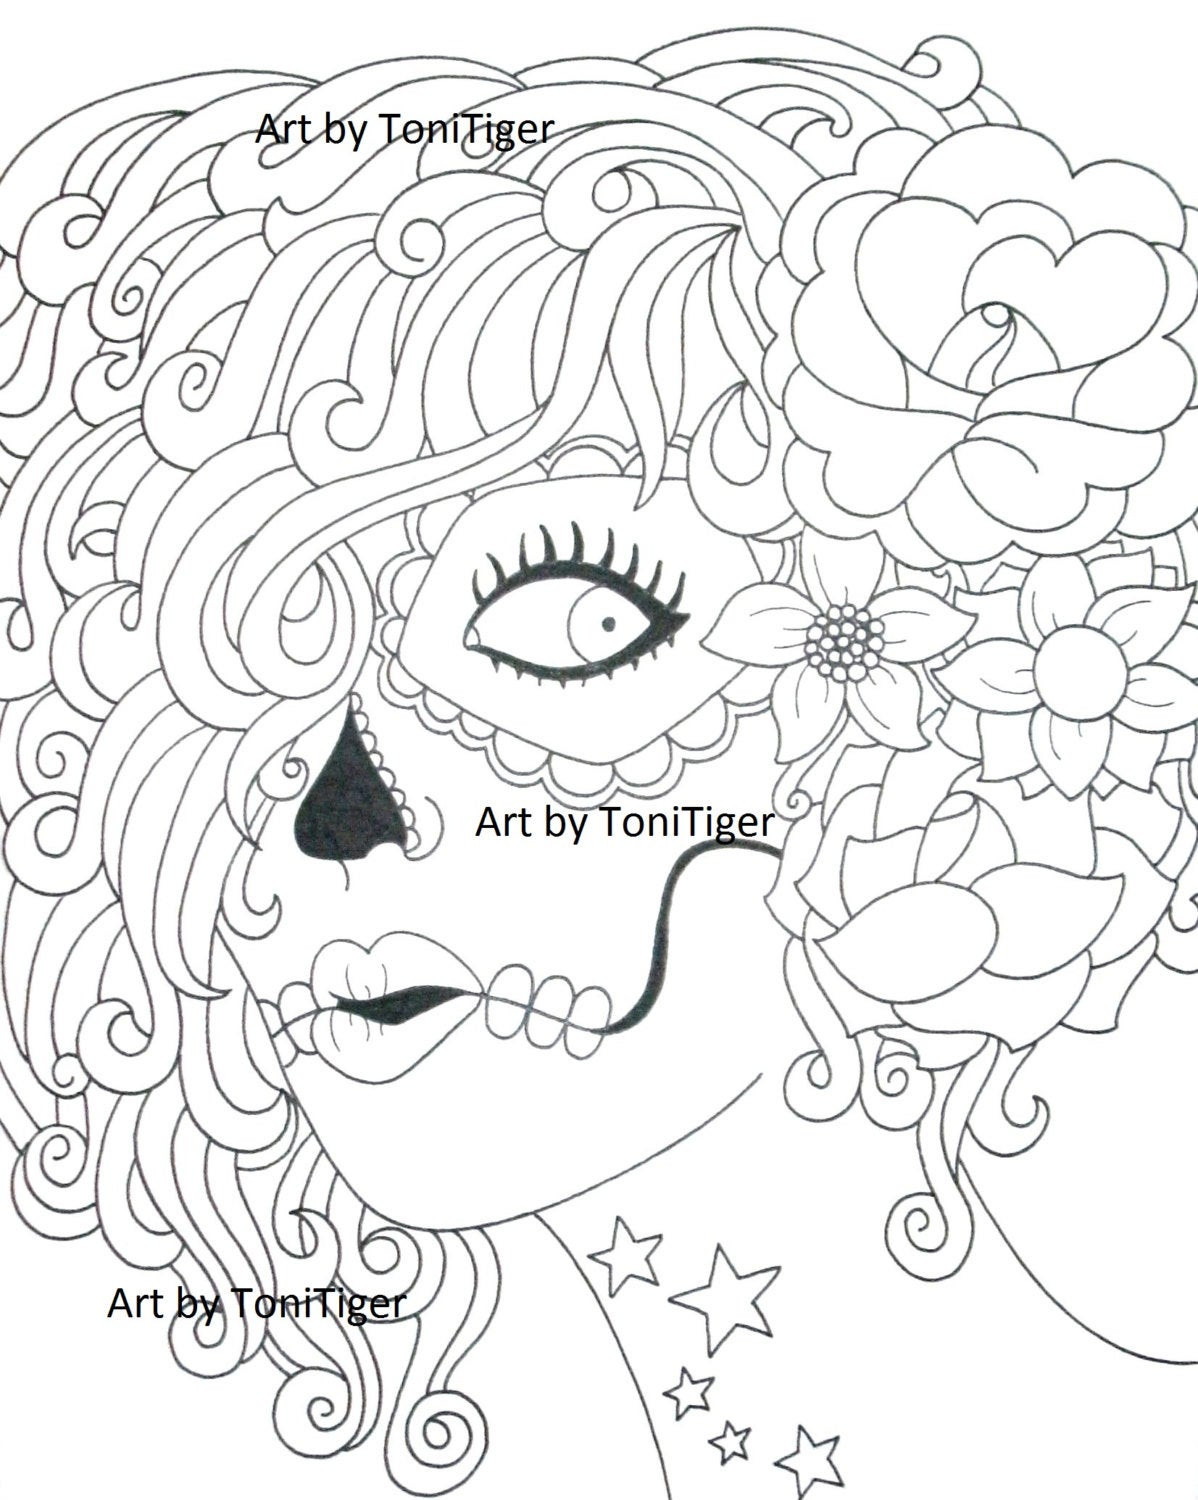 Girl Skull Coloring Pages
 Instant Digital Download Coloring Page Sugar Skull Girl